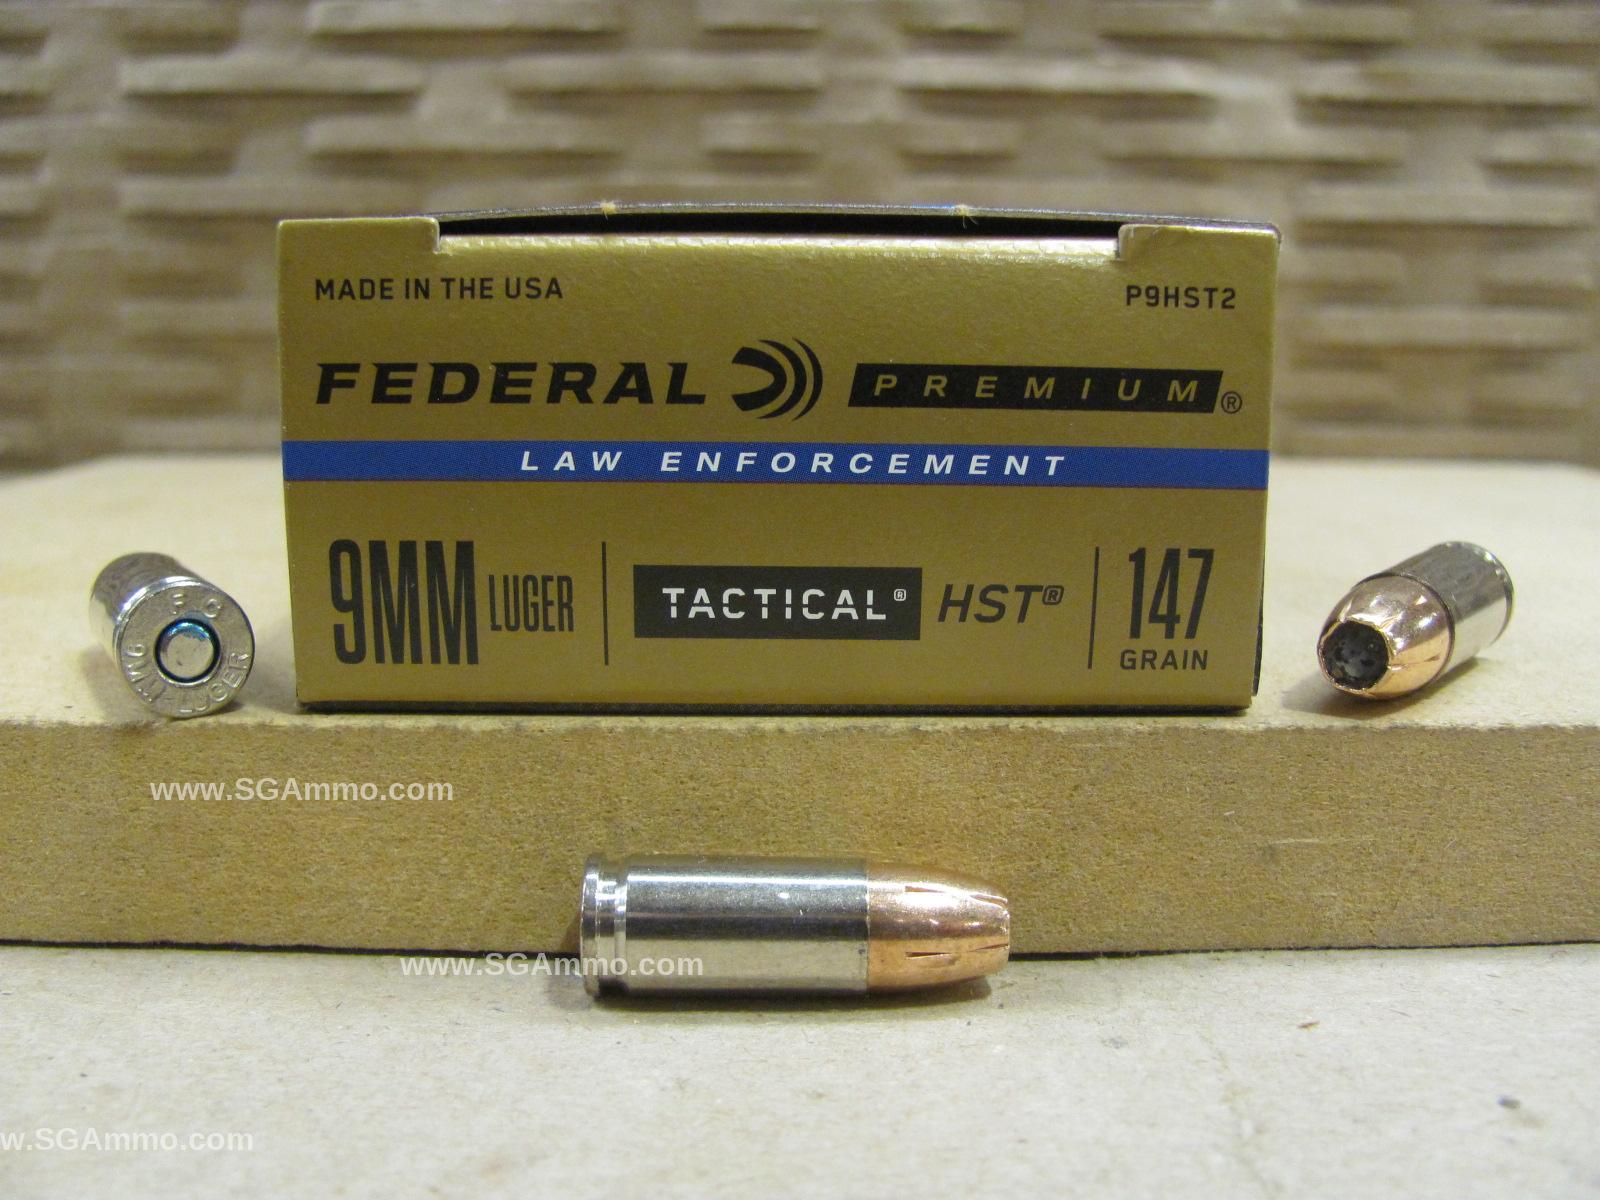 50 Round Box  - 9mm Luger Federal HST 147 Grain Hollow Point LE Ammo P9HST2